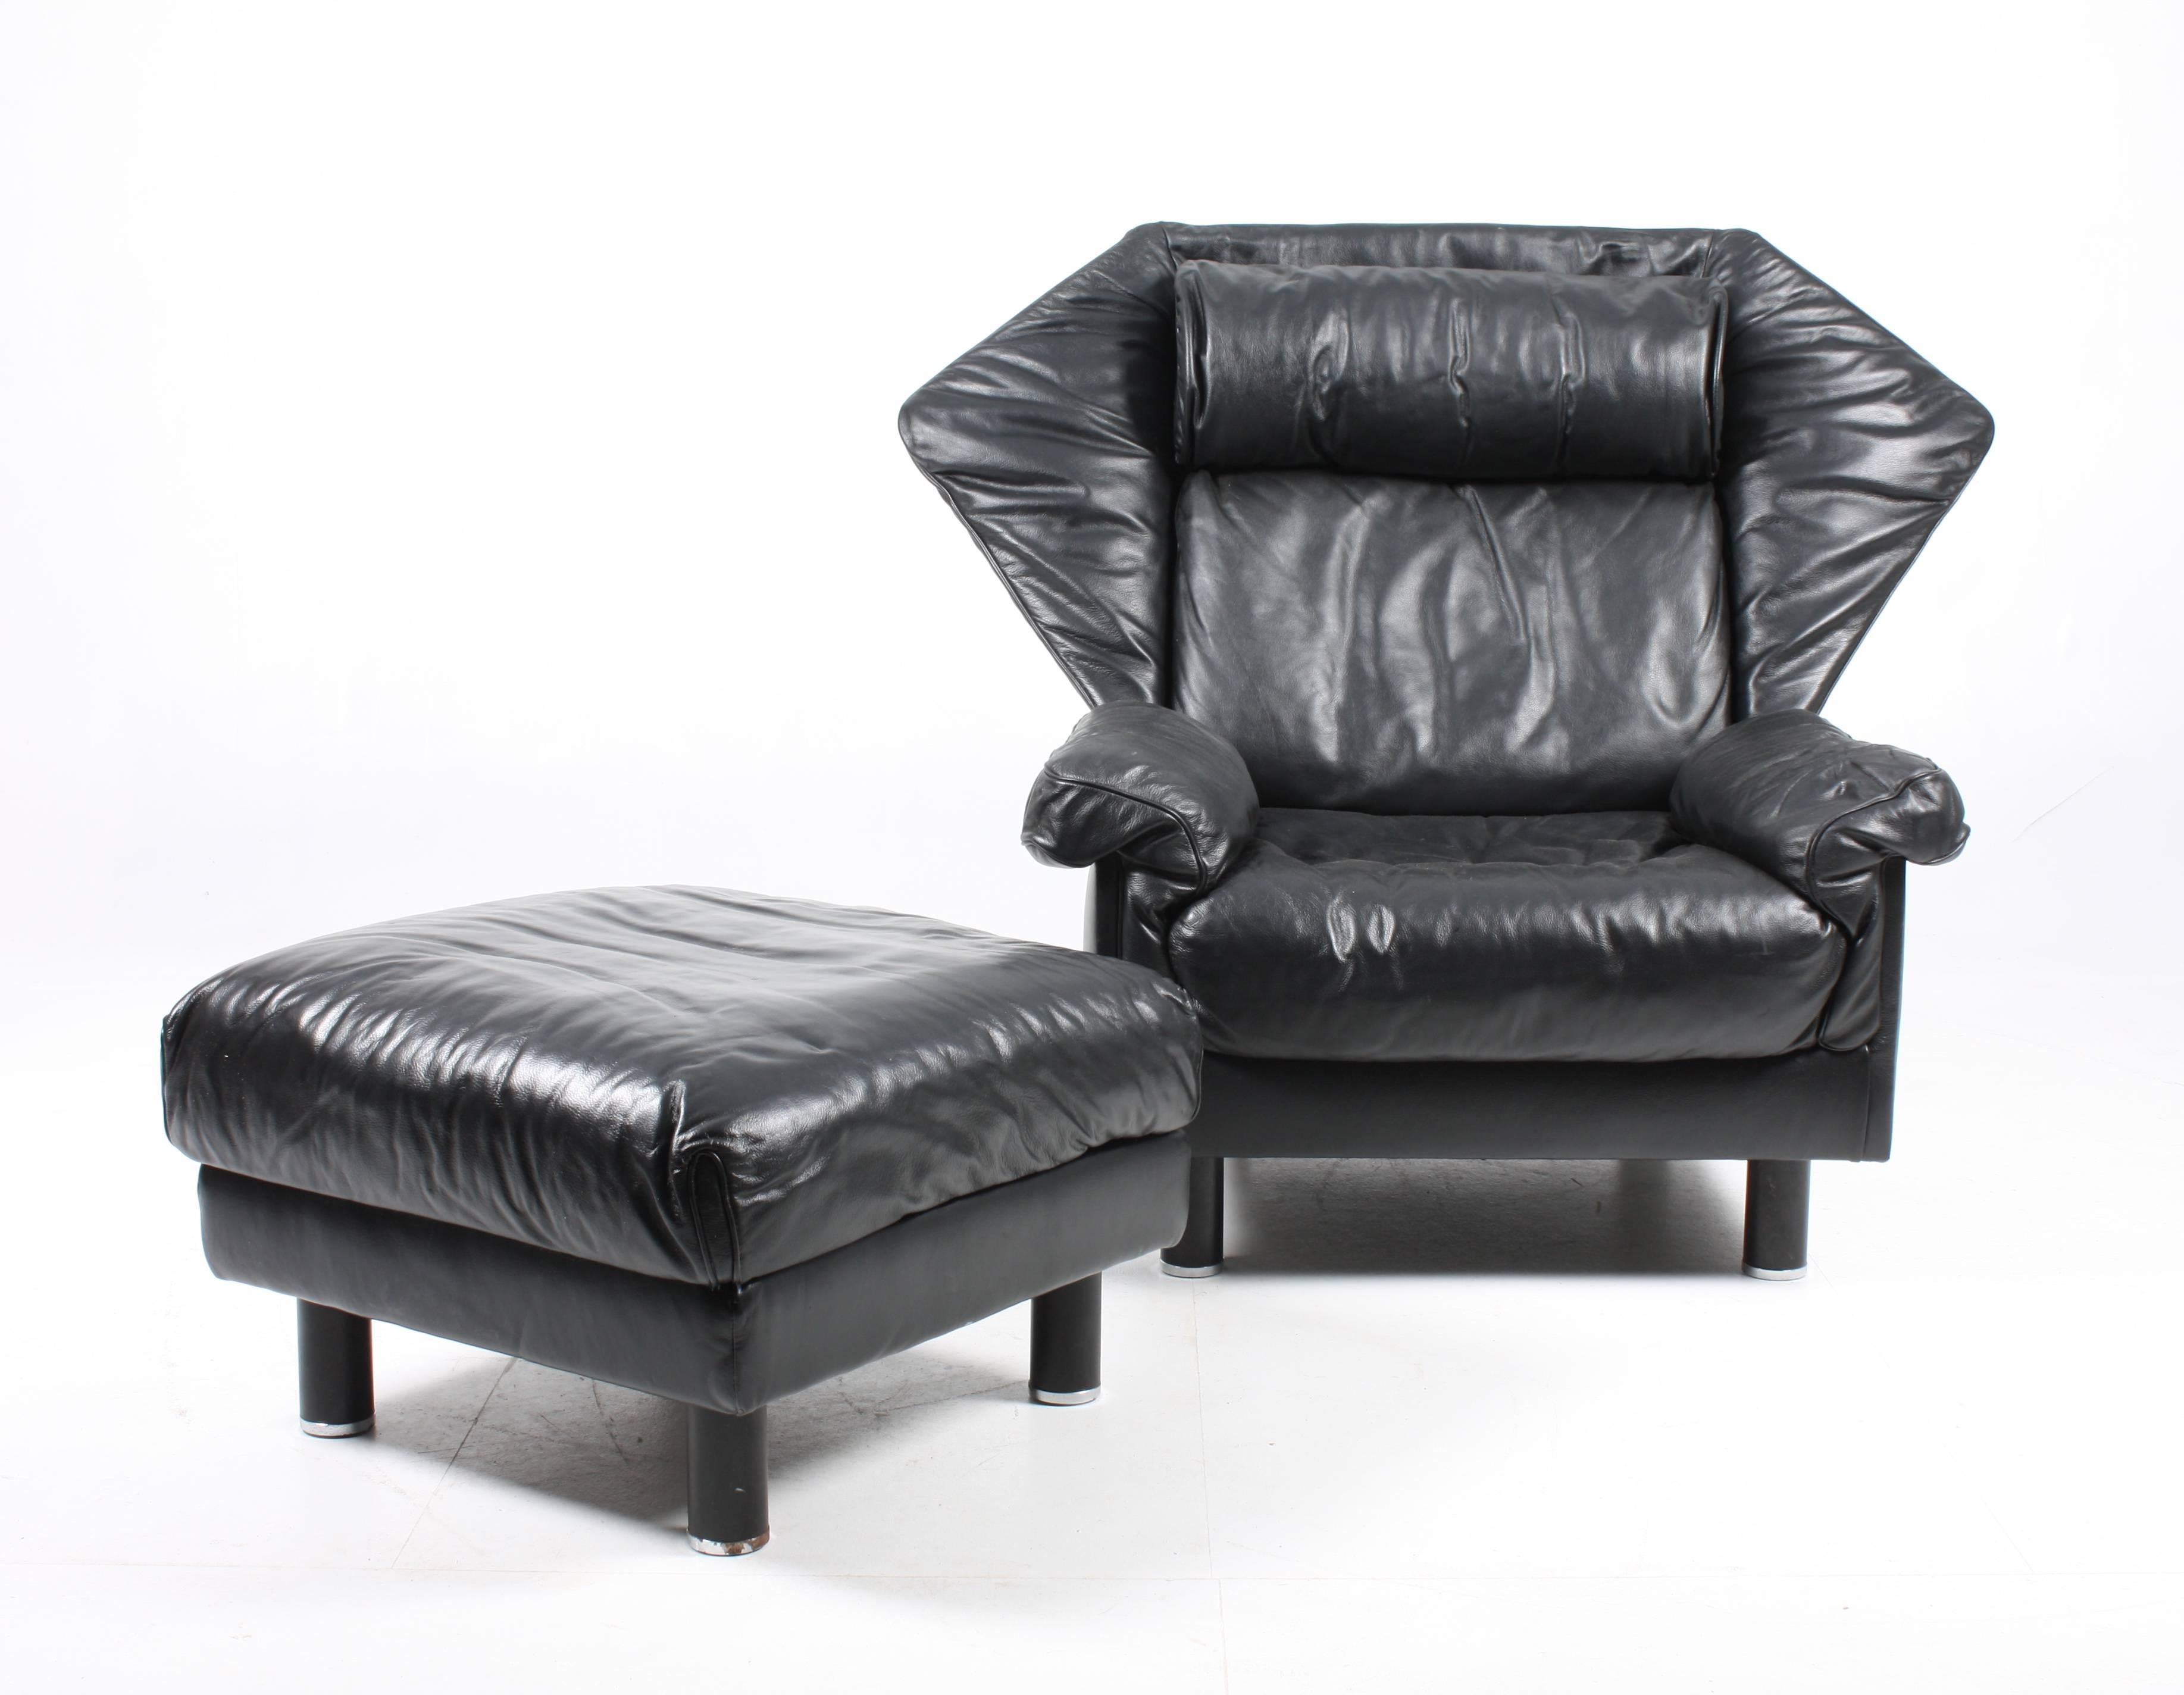 Pair of X large comfortable lounge chairs with one ottoman in patinated leather by De Sede. Great original condition.